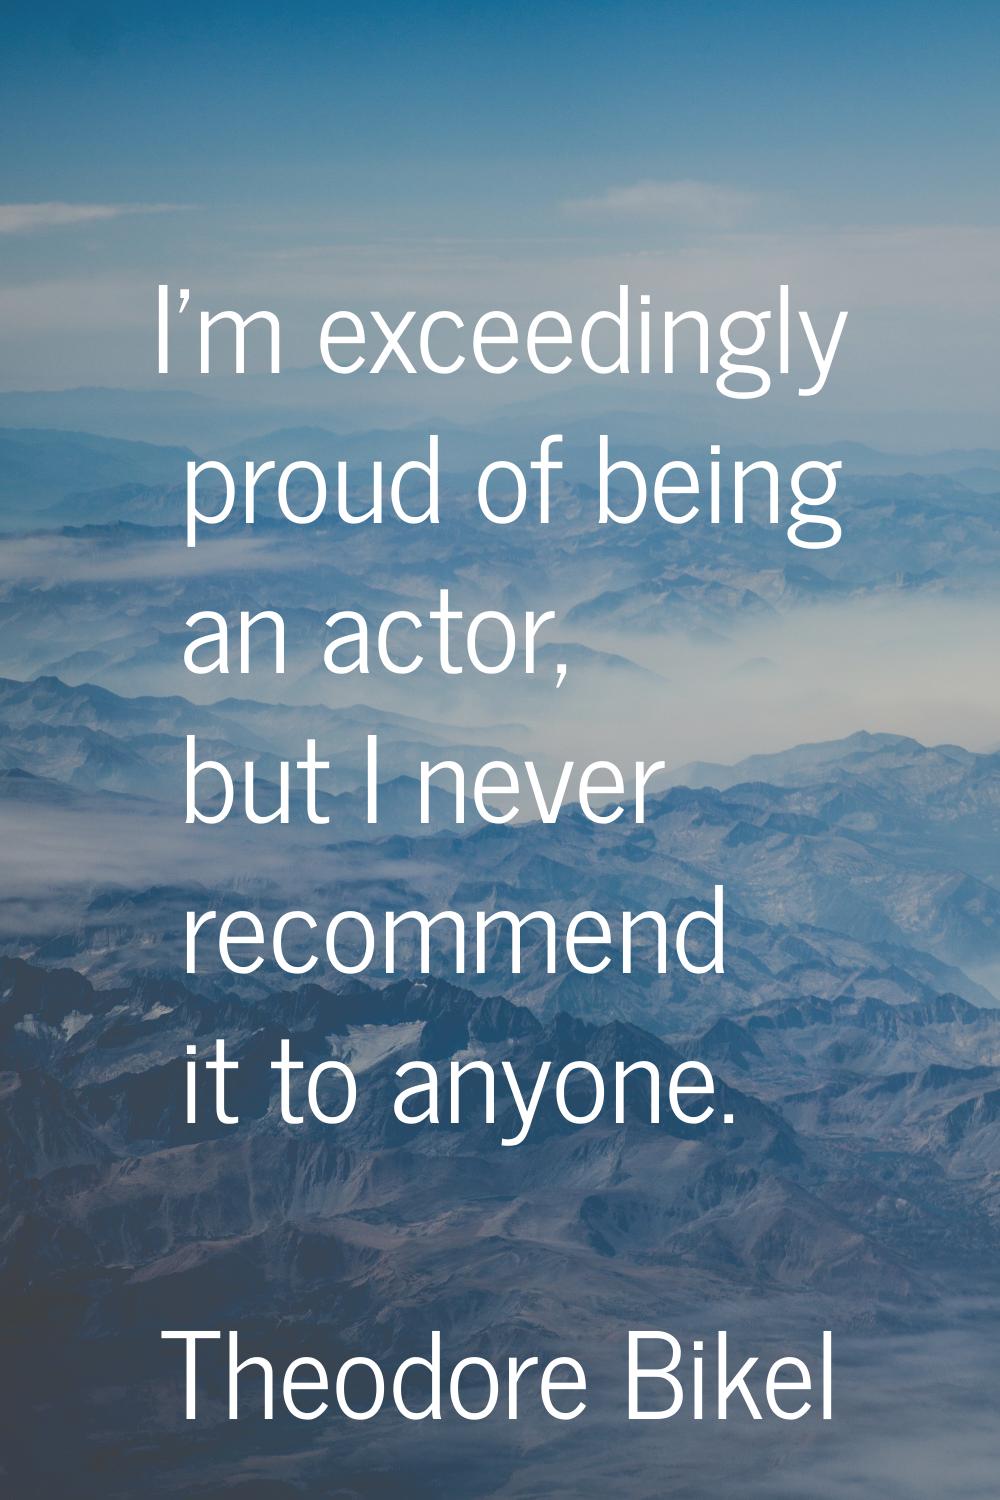 I'm exceedingly proud of being an actor, but I never recommend it to anyone.